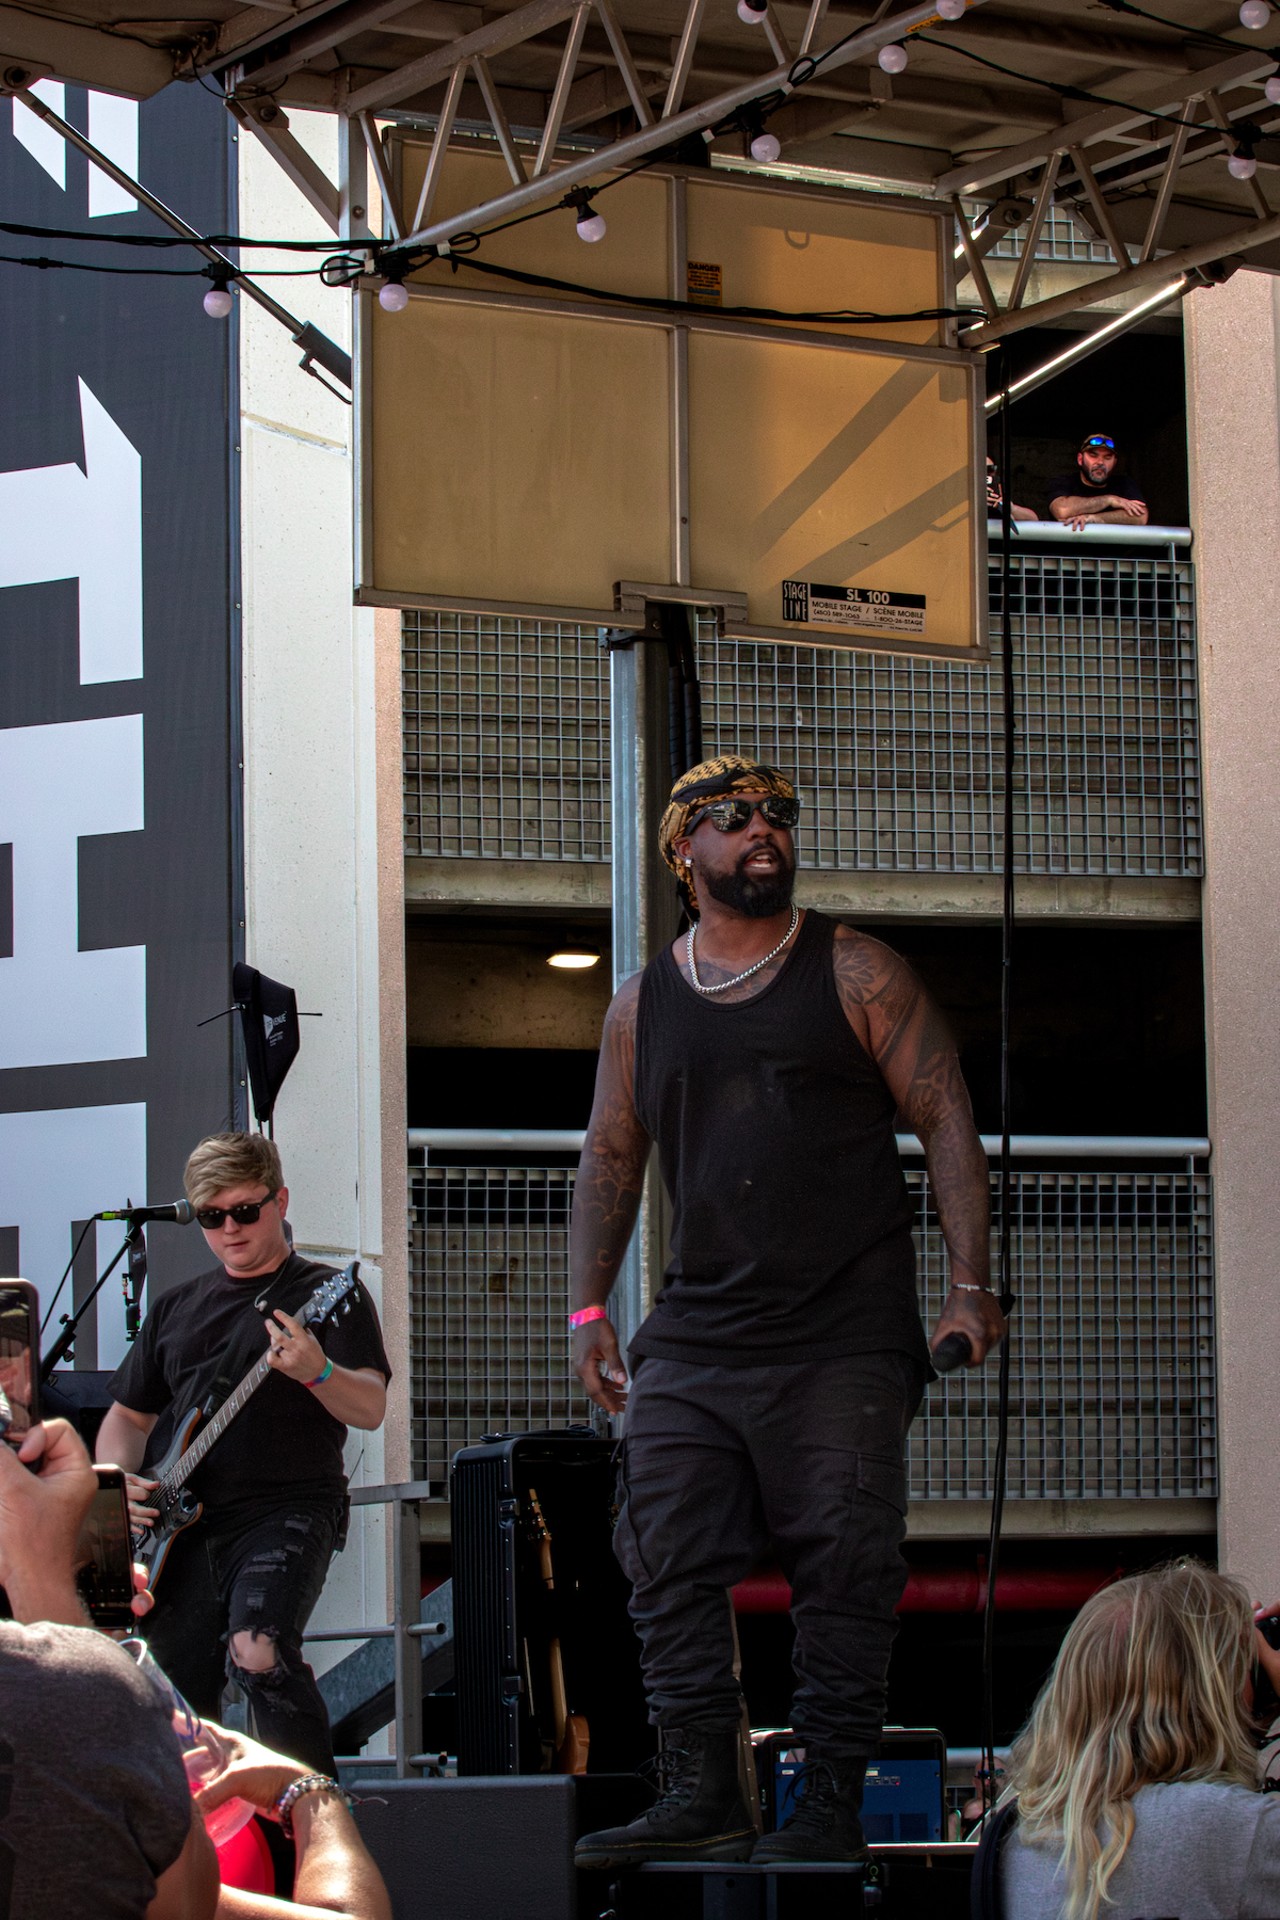 Photos of Staind, Seether, and more at Tampa's 98RockFest